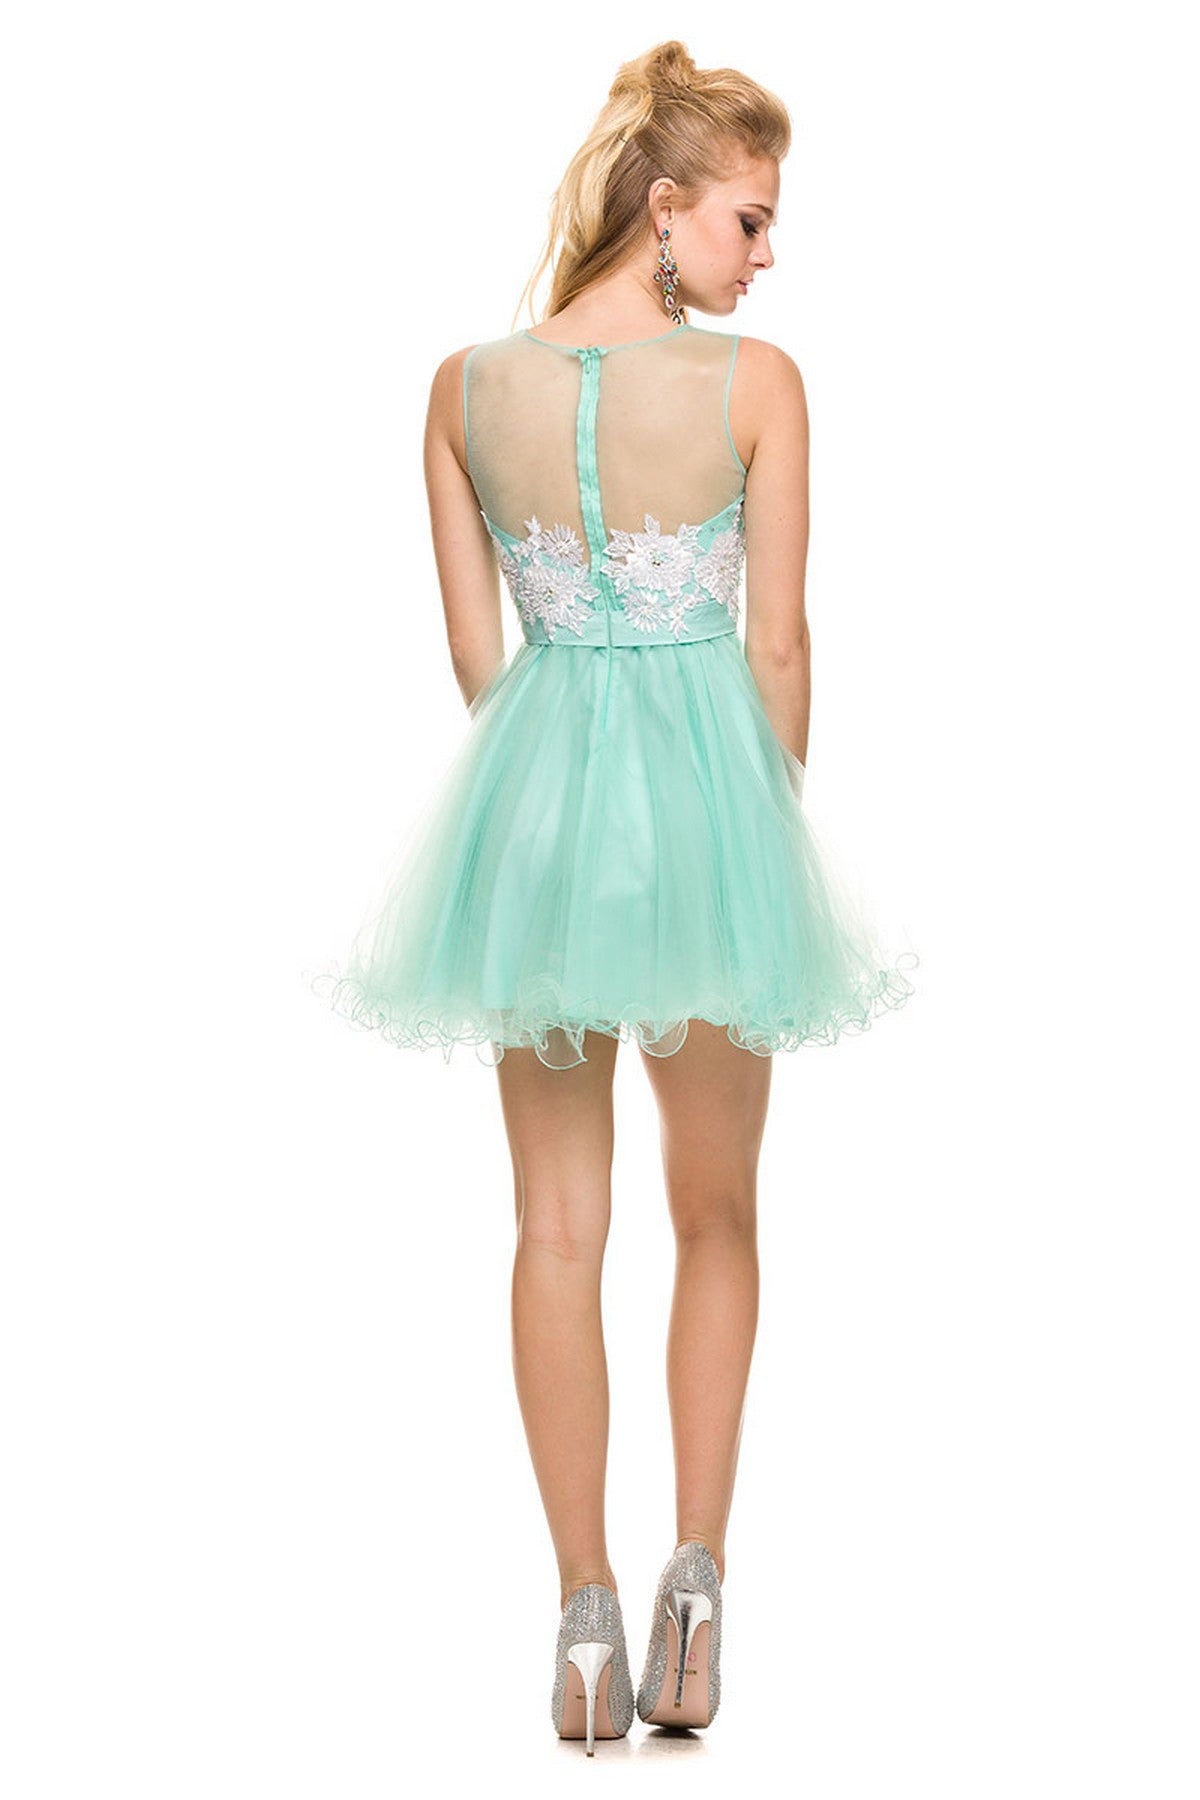 Nox Anabel 6040 Short Fit & Flare Lace Homecoming Cocktail Dress Formal High Neck Dress sheer   Available Size: 6, 10, 14  Available Color: Watermelon